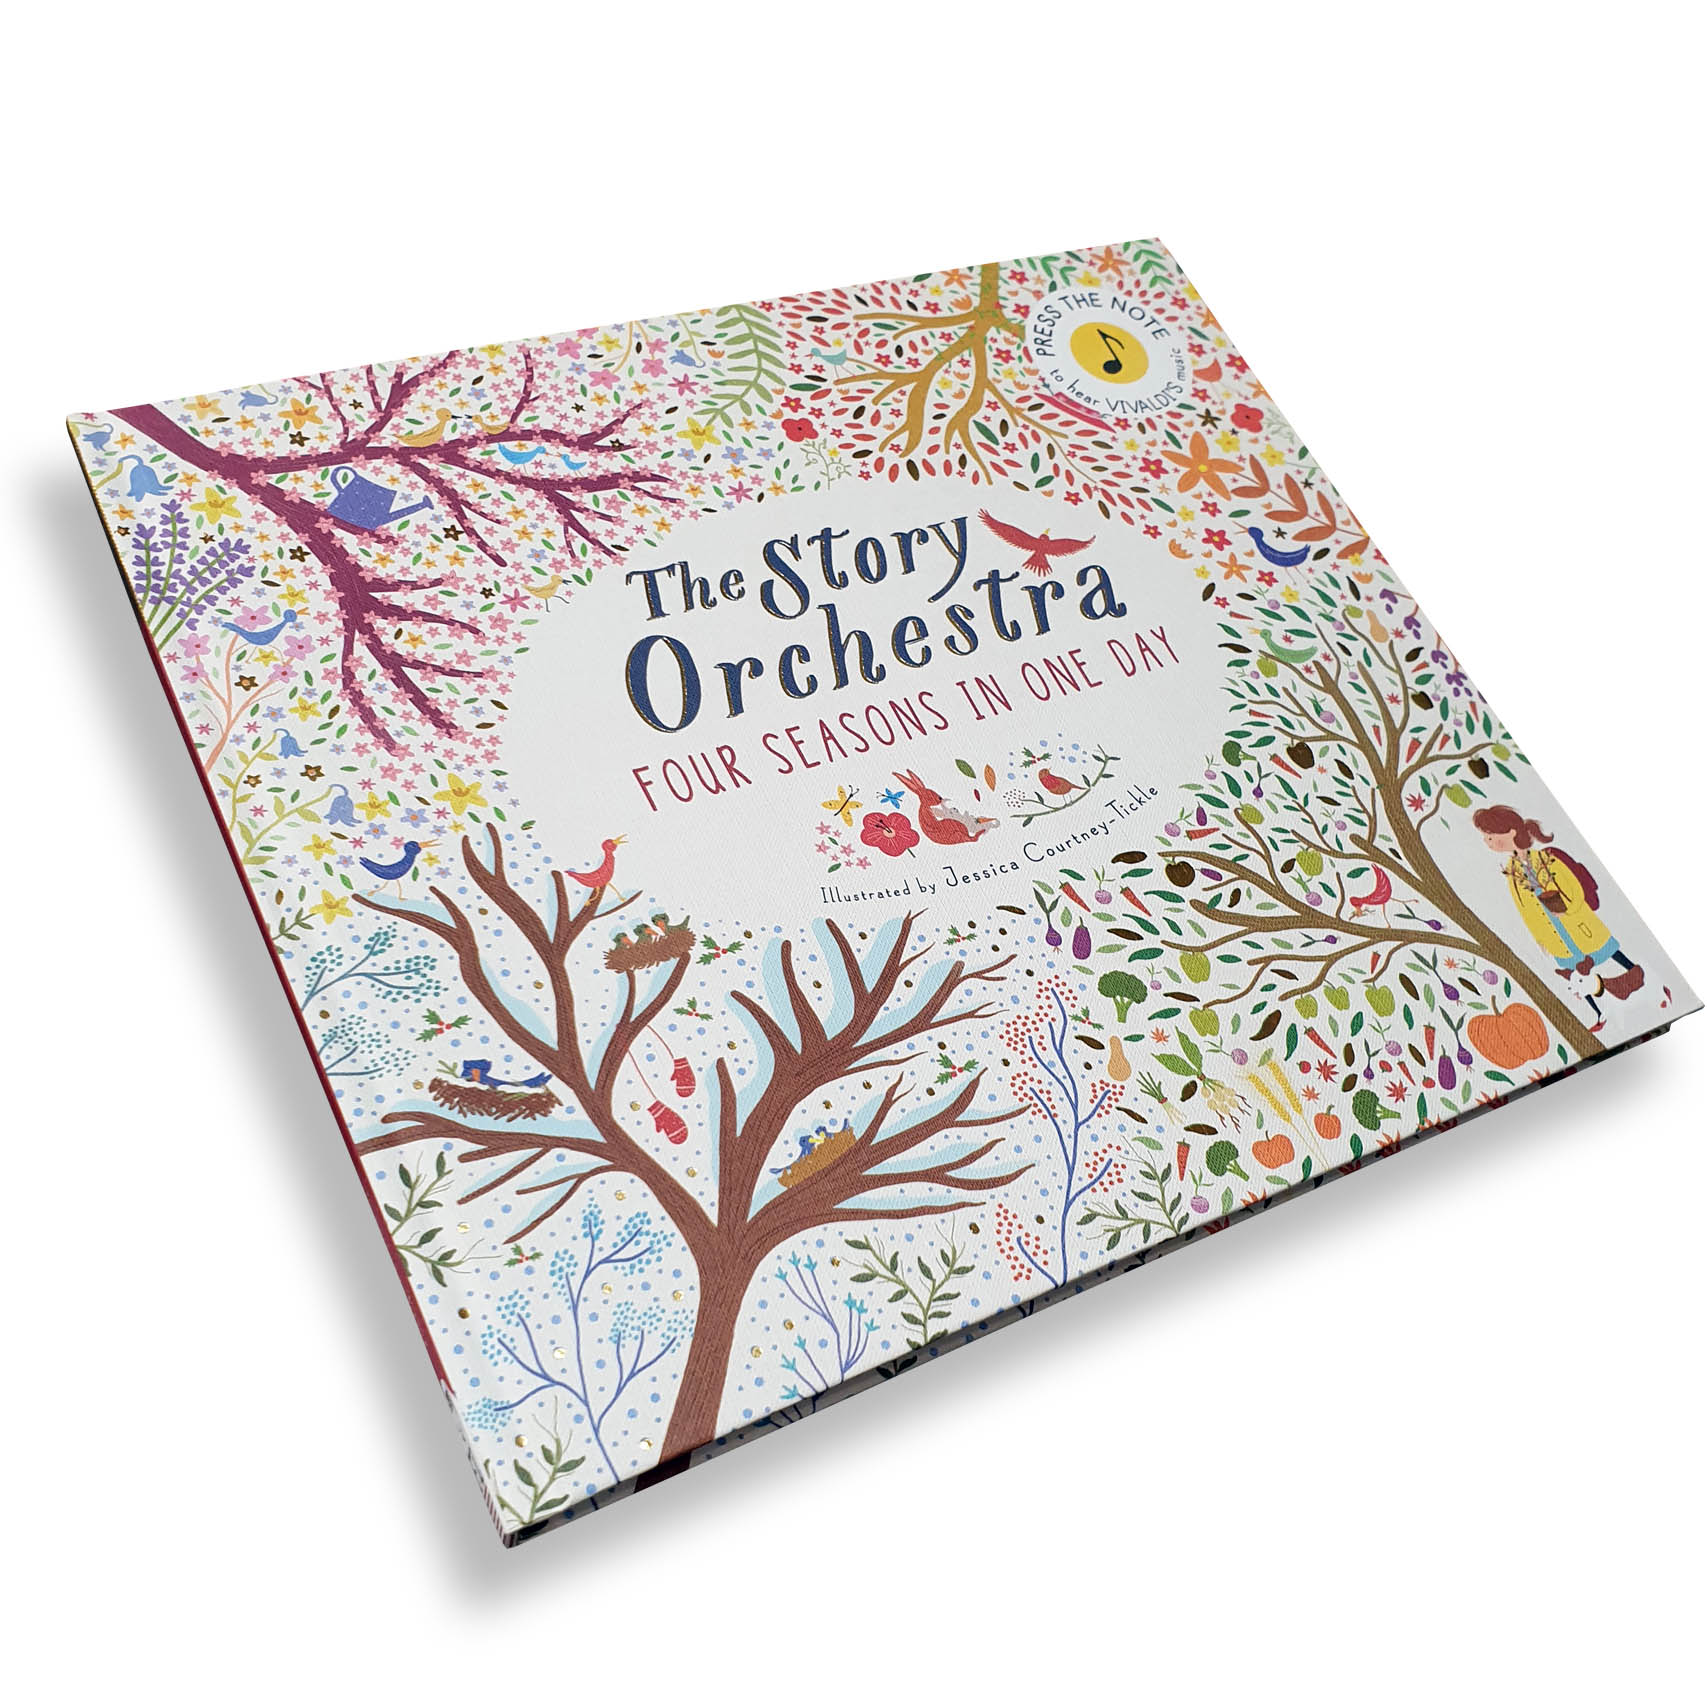 The Story Orchestra: Four Seasons in One Day - Deb's Hidden Treasures